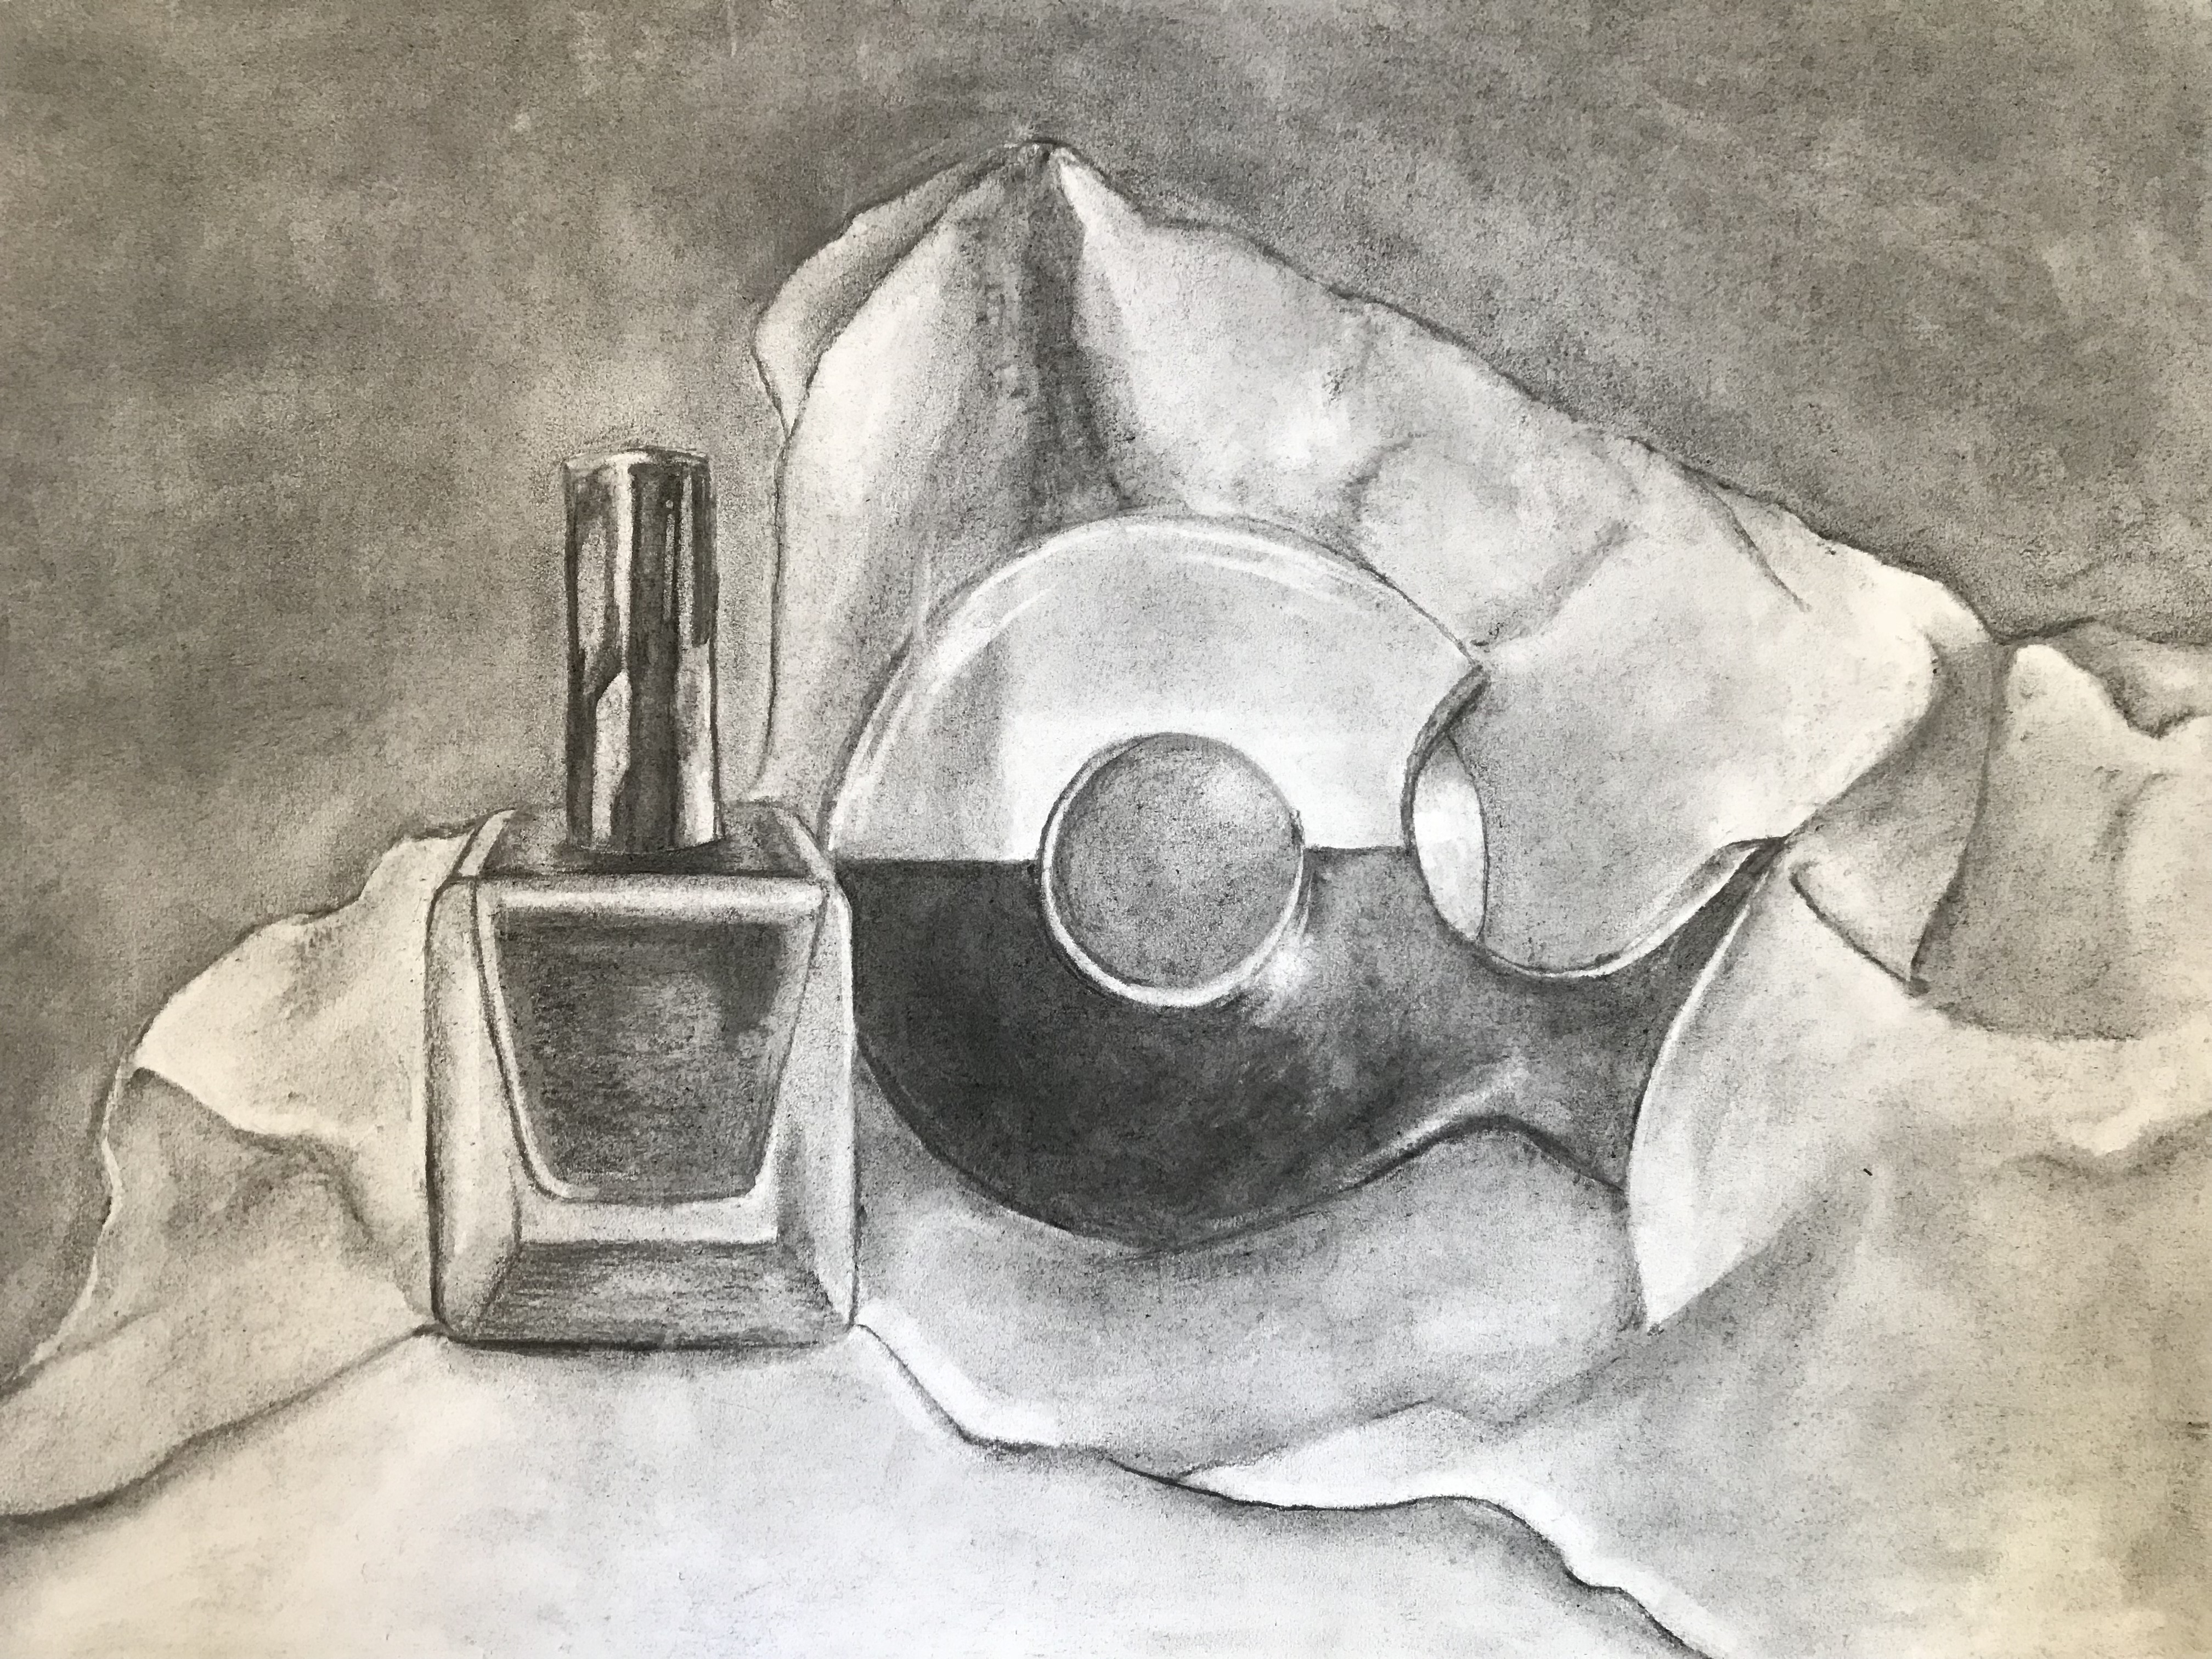 Chiaroscuro: Revealing and Concealing Texture